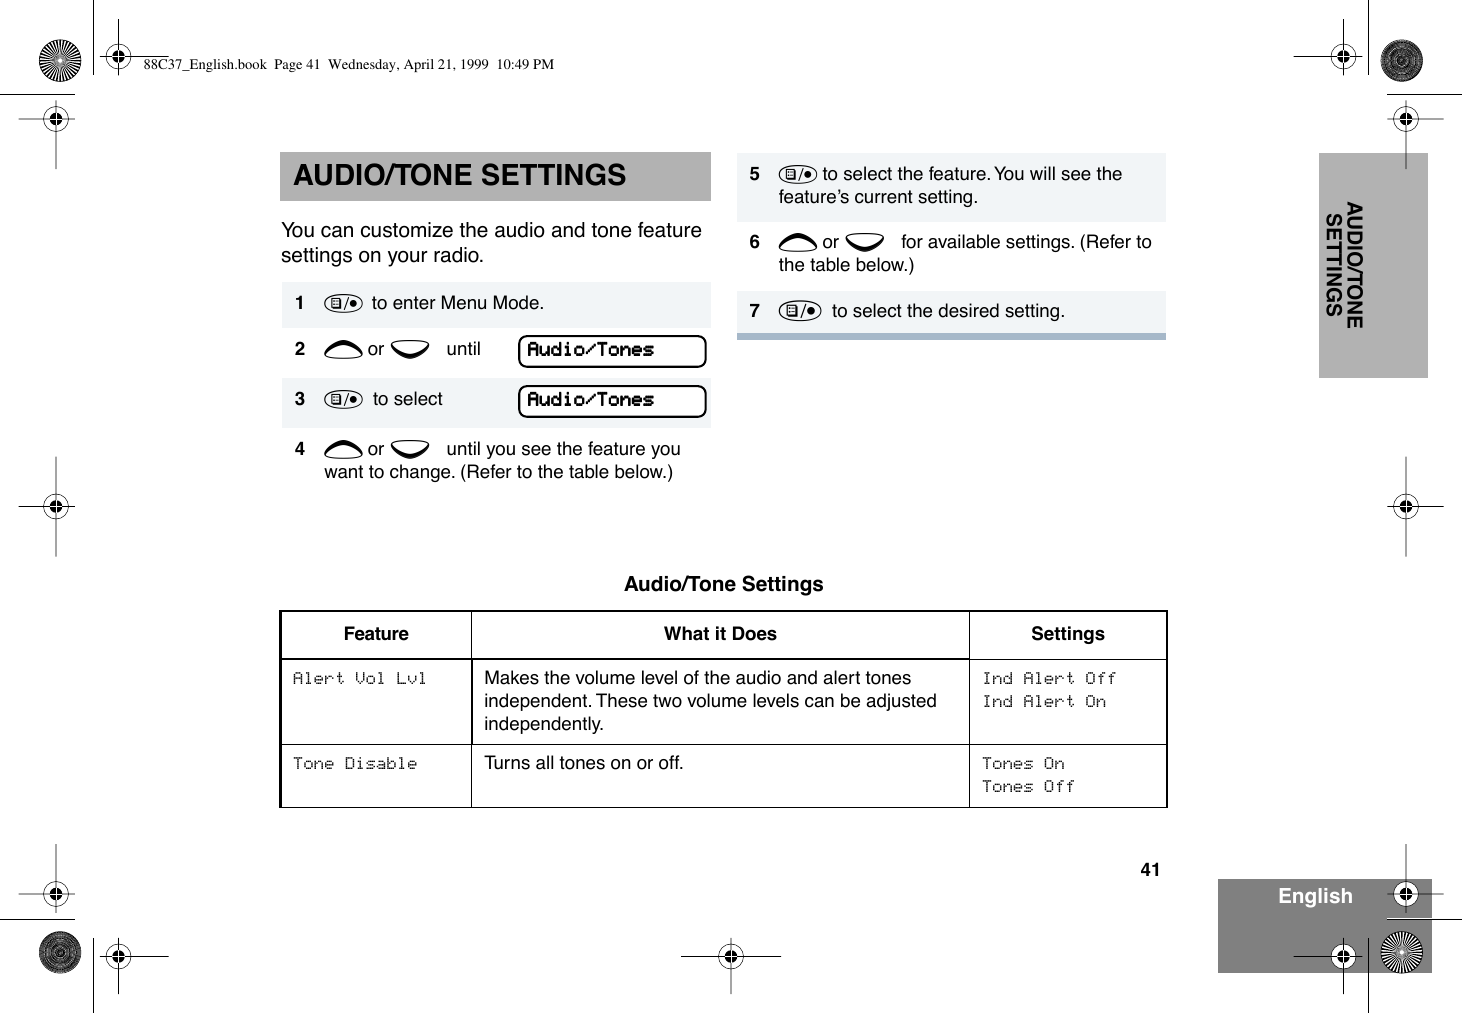 41EnglishAUDIO/TONE SETTINGSAUDIO/TONE SETTINGSYou can customize the audio and tone feature settings on your radio. 1)  to enter Menu Mode.2+ or e until3)  to select4+ or e until you see the feature you want to change. (Refer to the table below.)AAAAuuuuddddiiiioooo////TTTToooonnnneeeessssAAAAuuuuddddiiiioooo////TTTToooonnnneeeessss5) to select the feature. You will see the featureÕs current setting.6+ or e for available settings. (Refer to the table below.)7)  to select the desired setting. Audio/Tone SettingsFeature What it Does SettingsAlert Vol Lvl Makes the volume level of the audio and alert tones independent. These two volume levels can be adjusted independently.Ind Alert OffInd Alert OnTone Disable Turns all tones on or off. Tones OnTones Off88C37_English.book  Page 41  Wednesday, April 21, 1999  10:49 PM